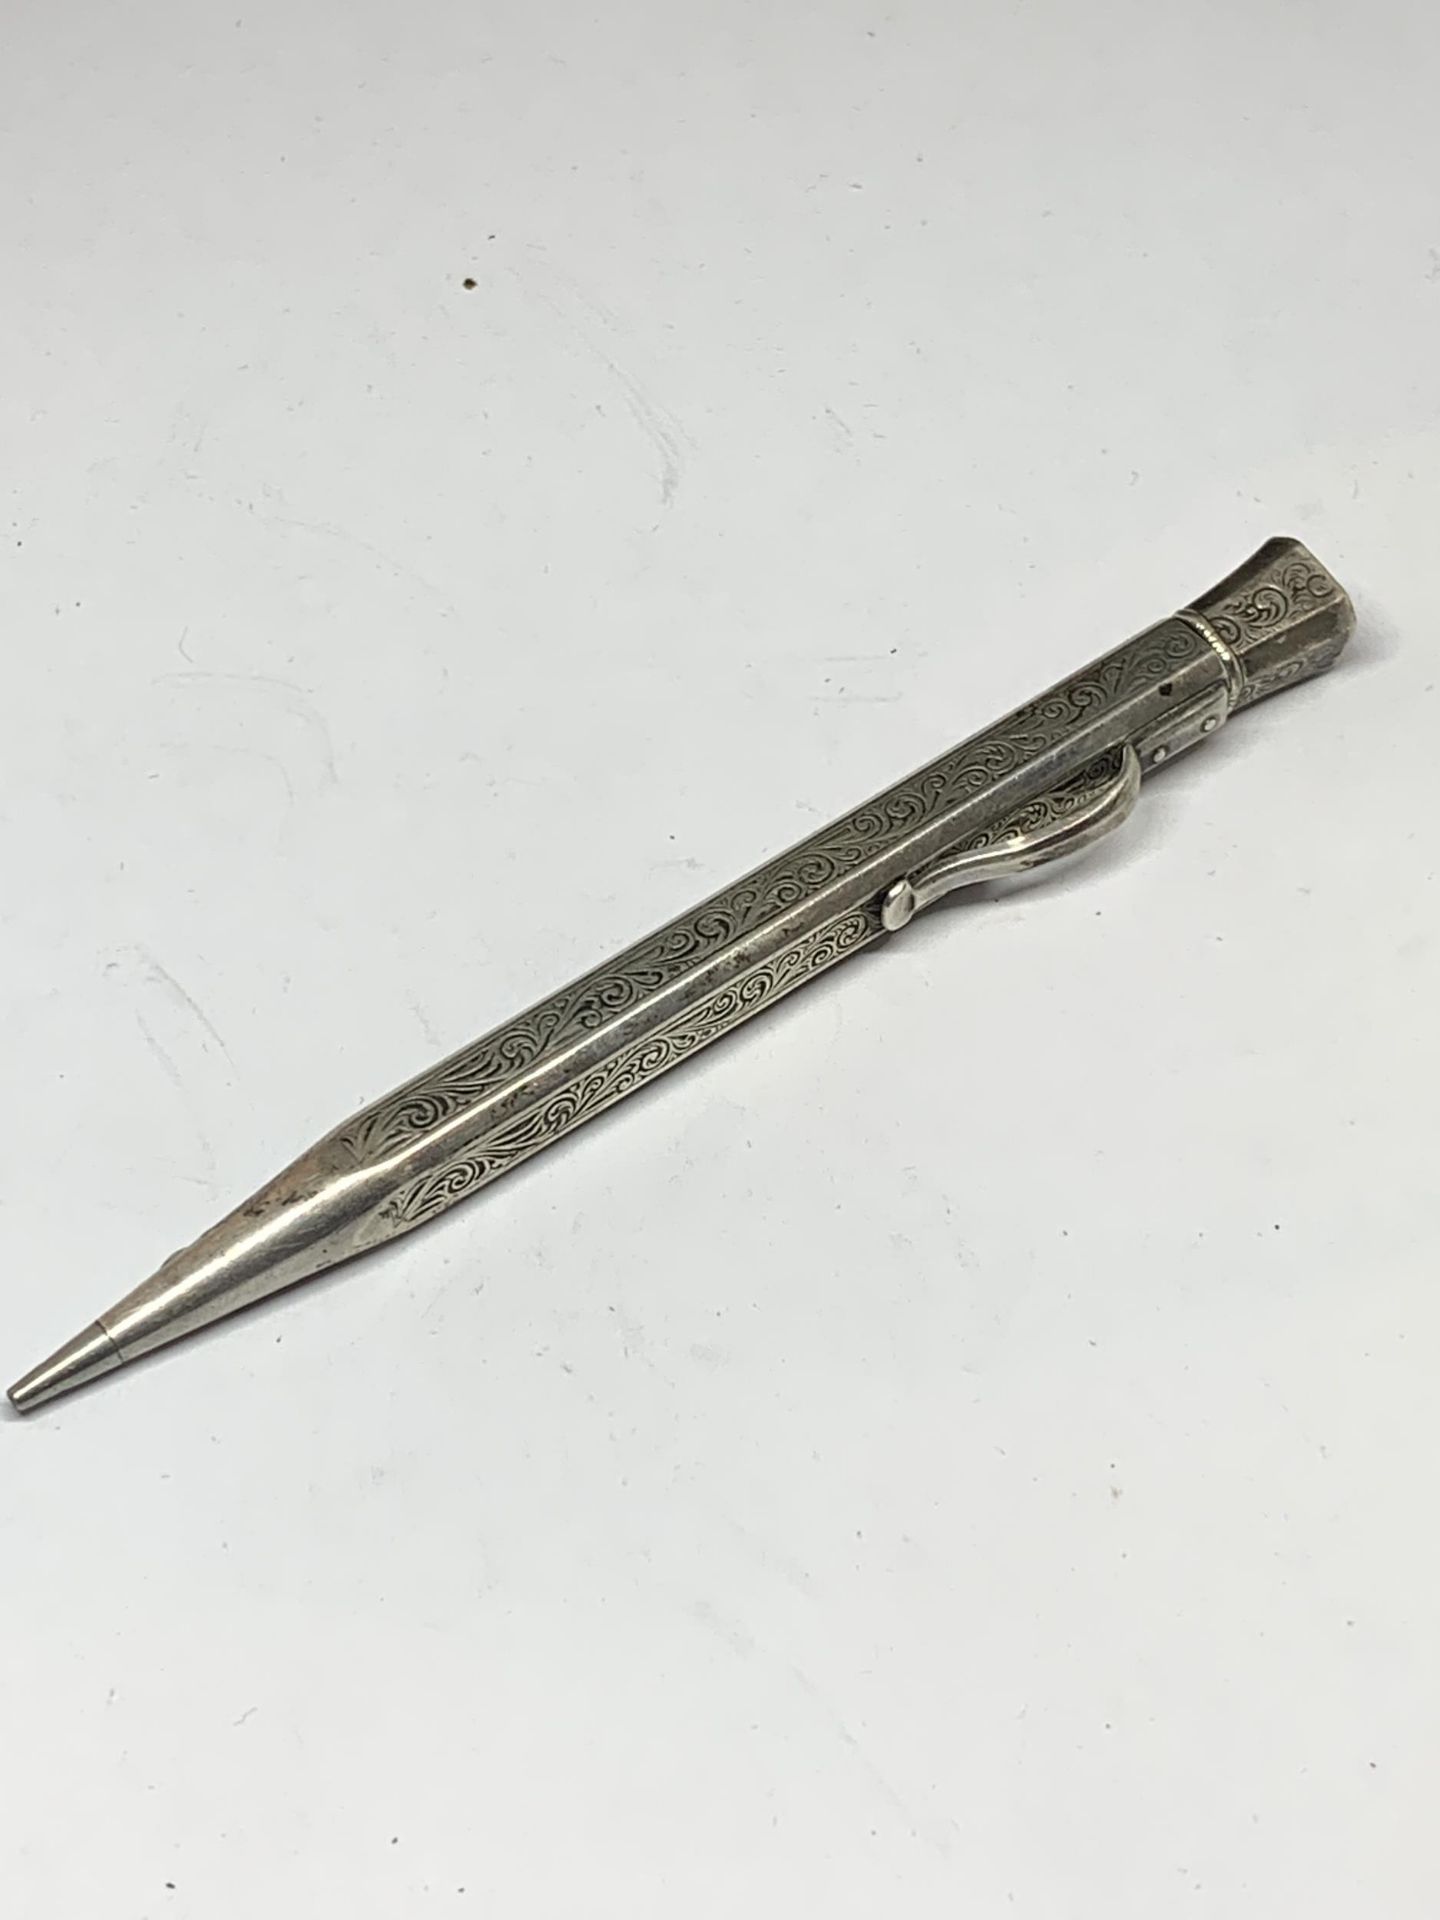 A VINTAGE MARKED STERLING SILVER PROPELLING PENCIL - Image 2 of 3